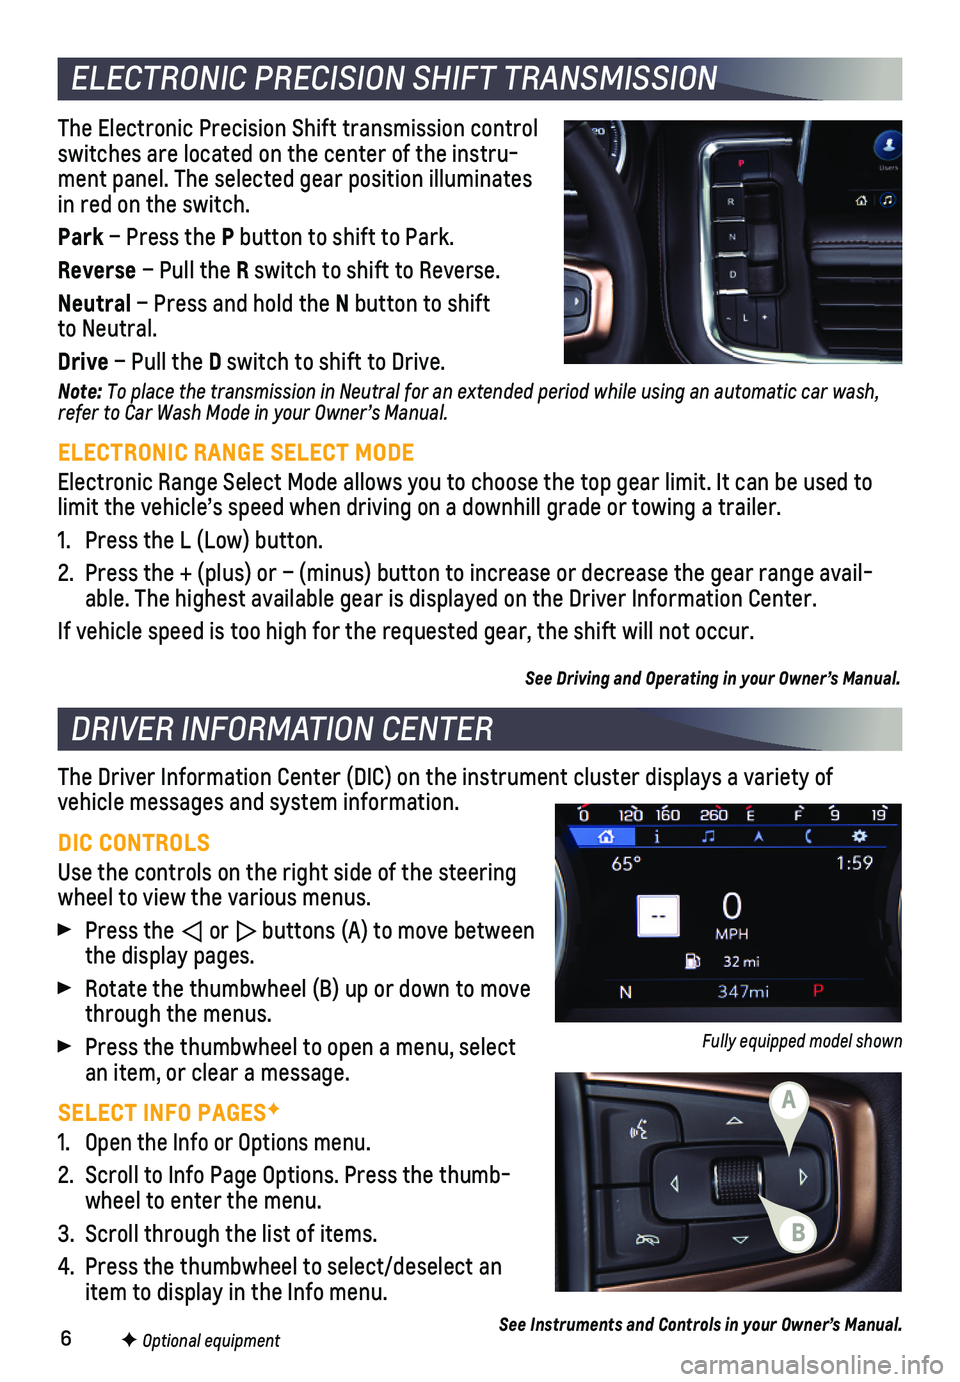 CHEVROLET SUBURBAN 2021  Get To Know Guide 6F Optional equipment
ELECTRONIC PRECISION SHIFT TRANSMISSION
The Electronic Precision Shift transmission control switches are located on the center of the instru-ment panel. The selected gear positio